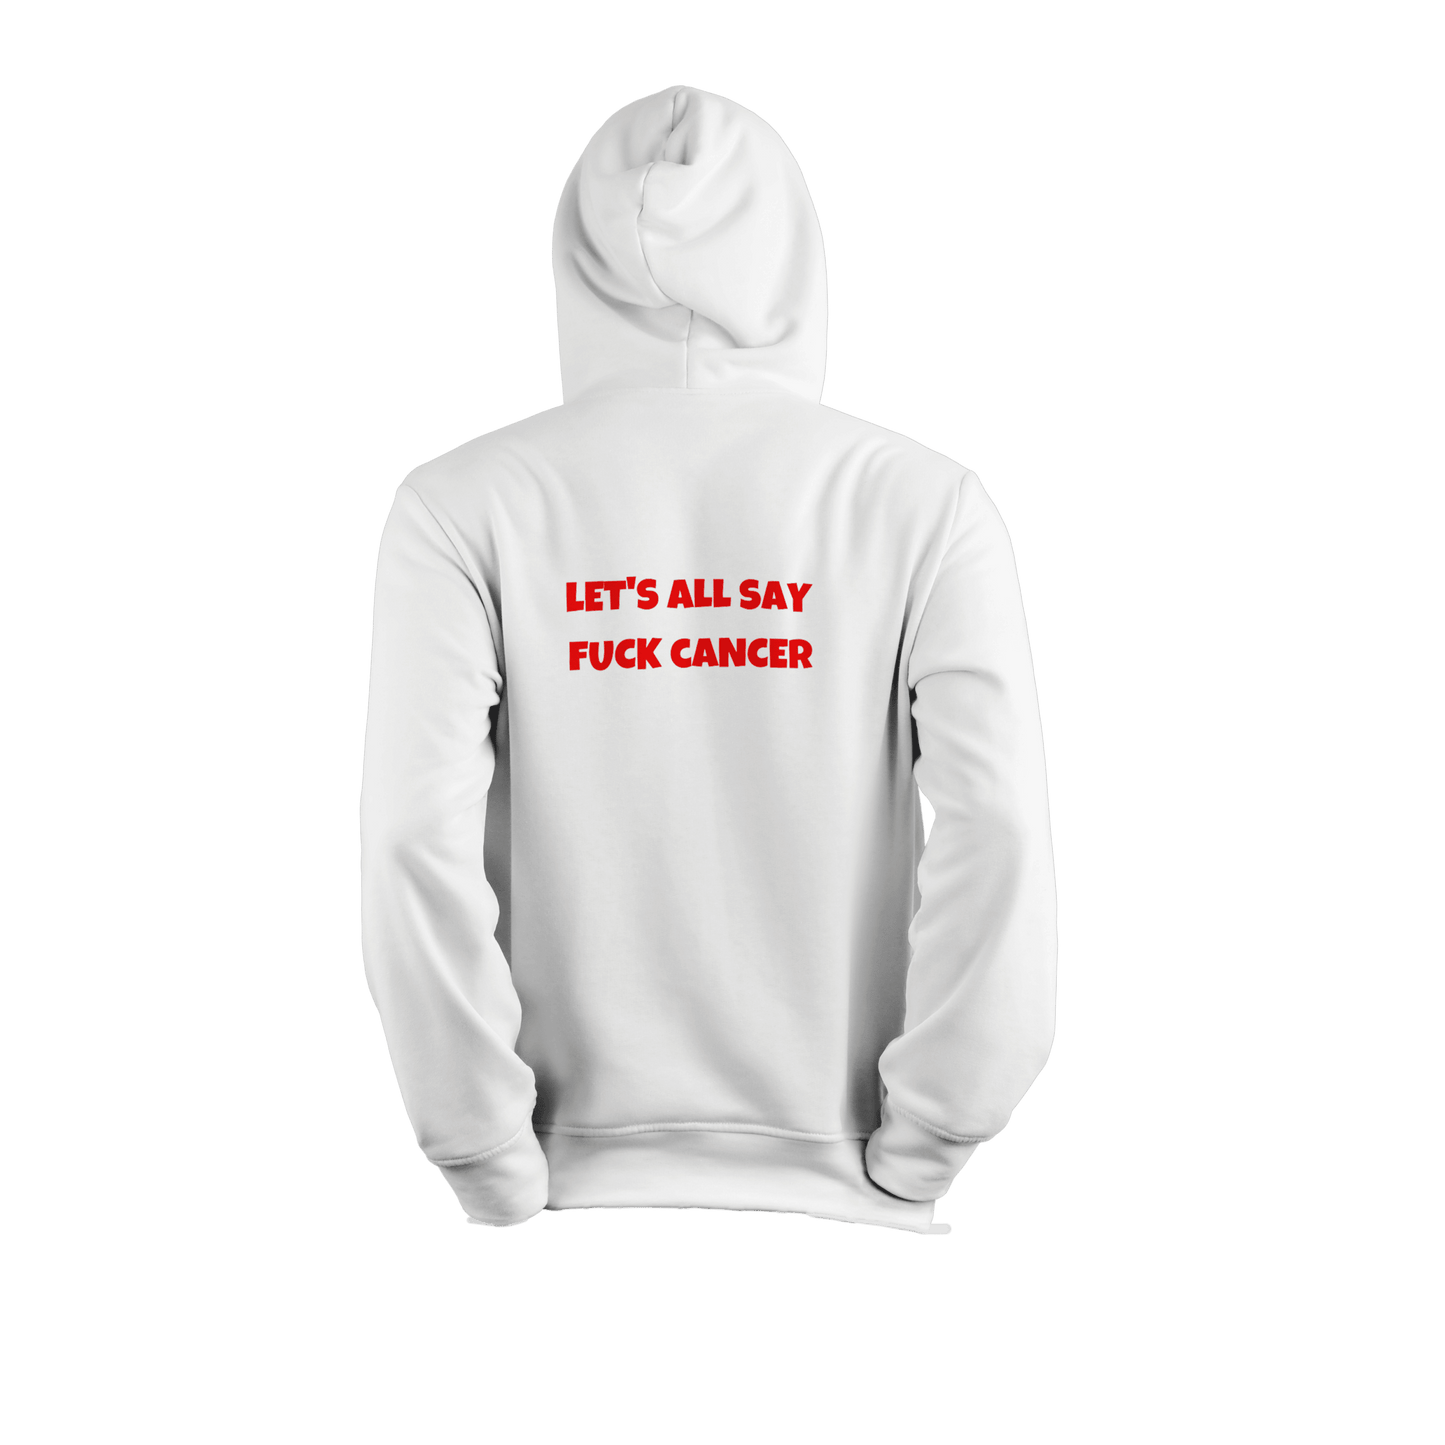 NoGunz Hoodie: Let's all say Fuck Cancer